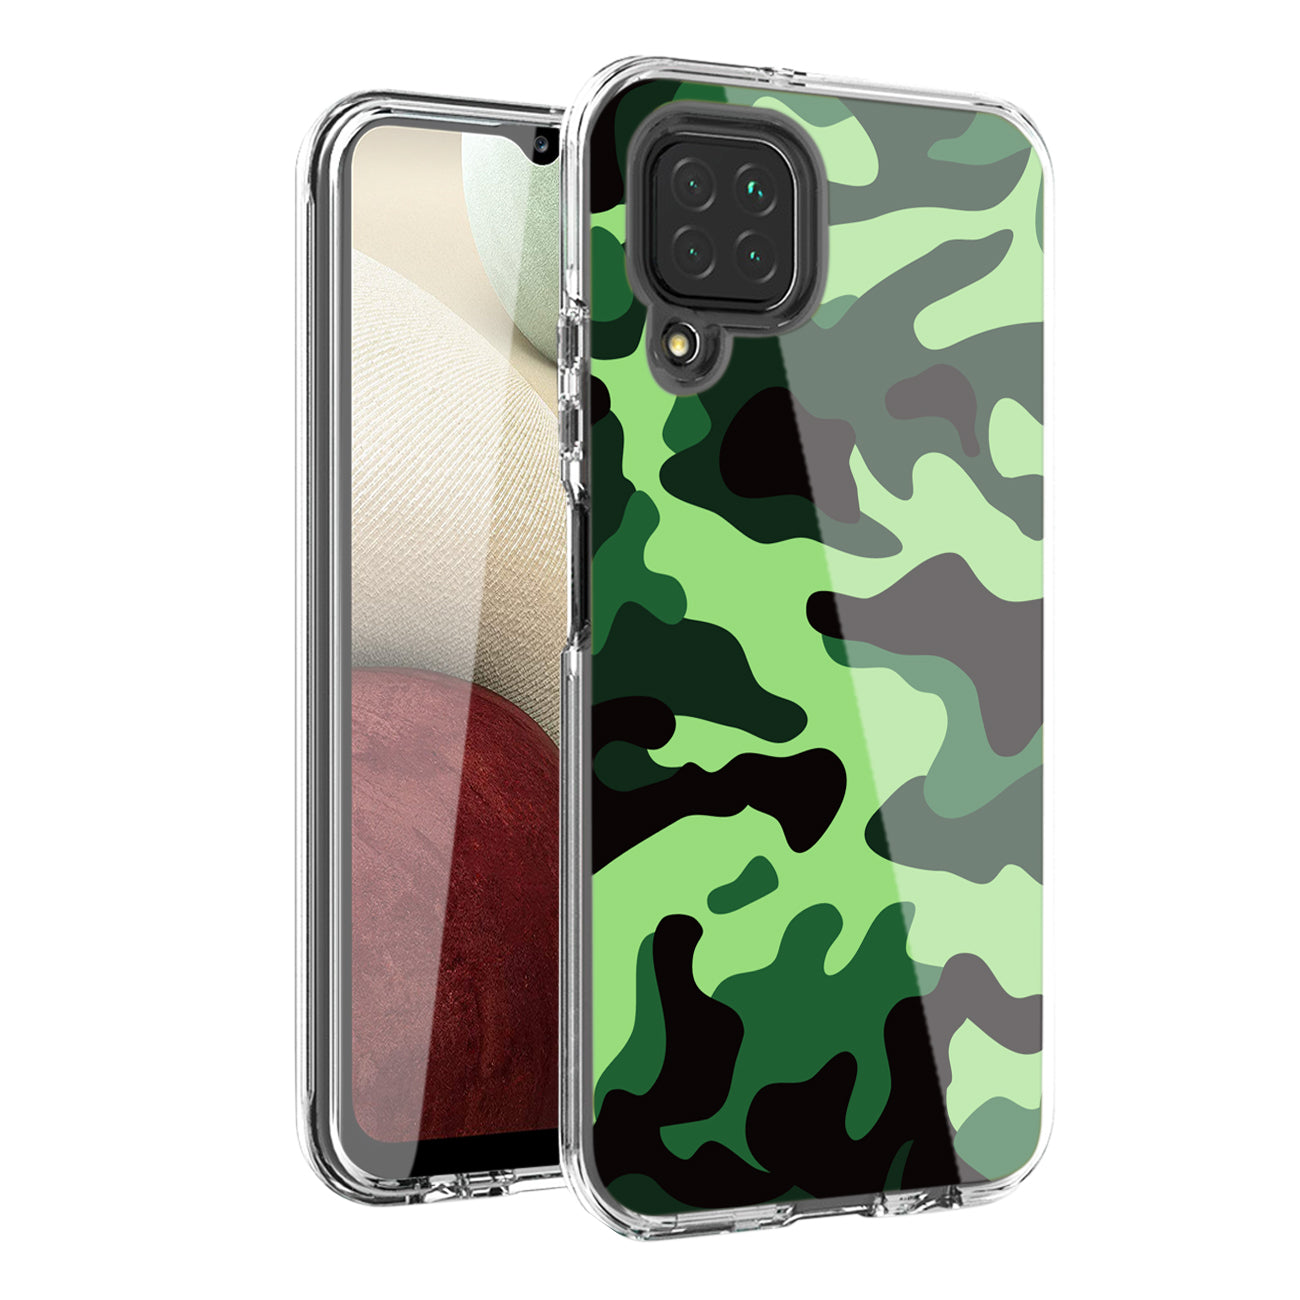 Camouflage Dual Layer Hybrid Hard & Soft TPU Rubber Case for SAMS GALAXY A12 5G In Mint Green